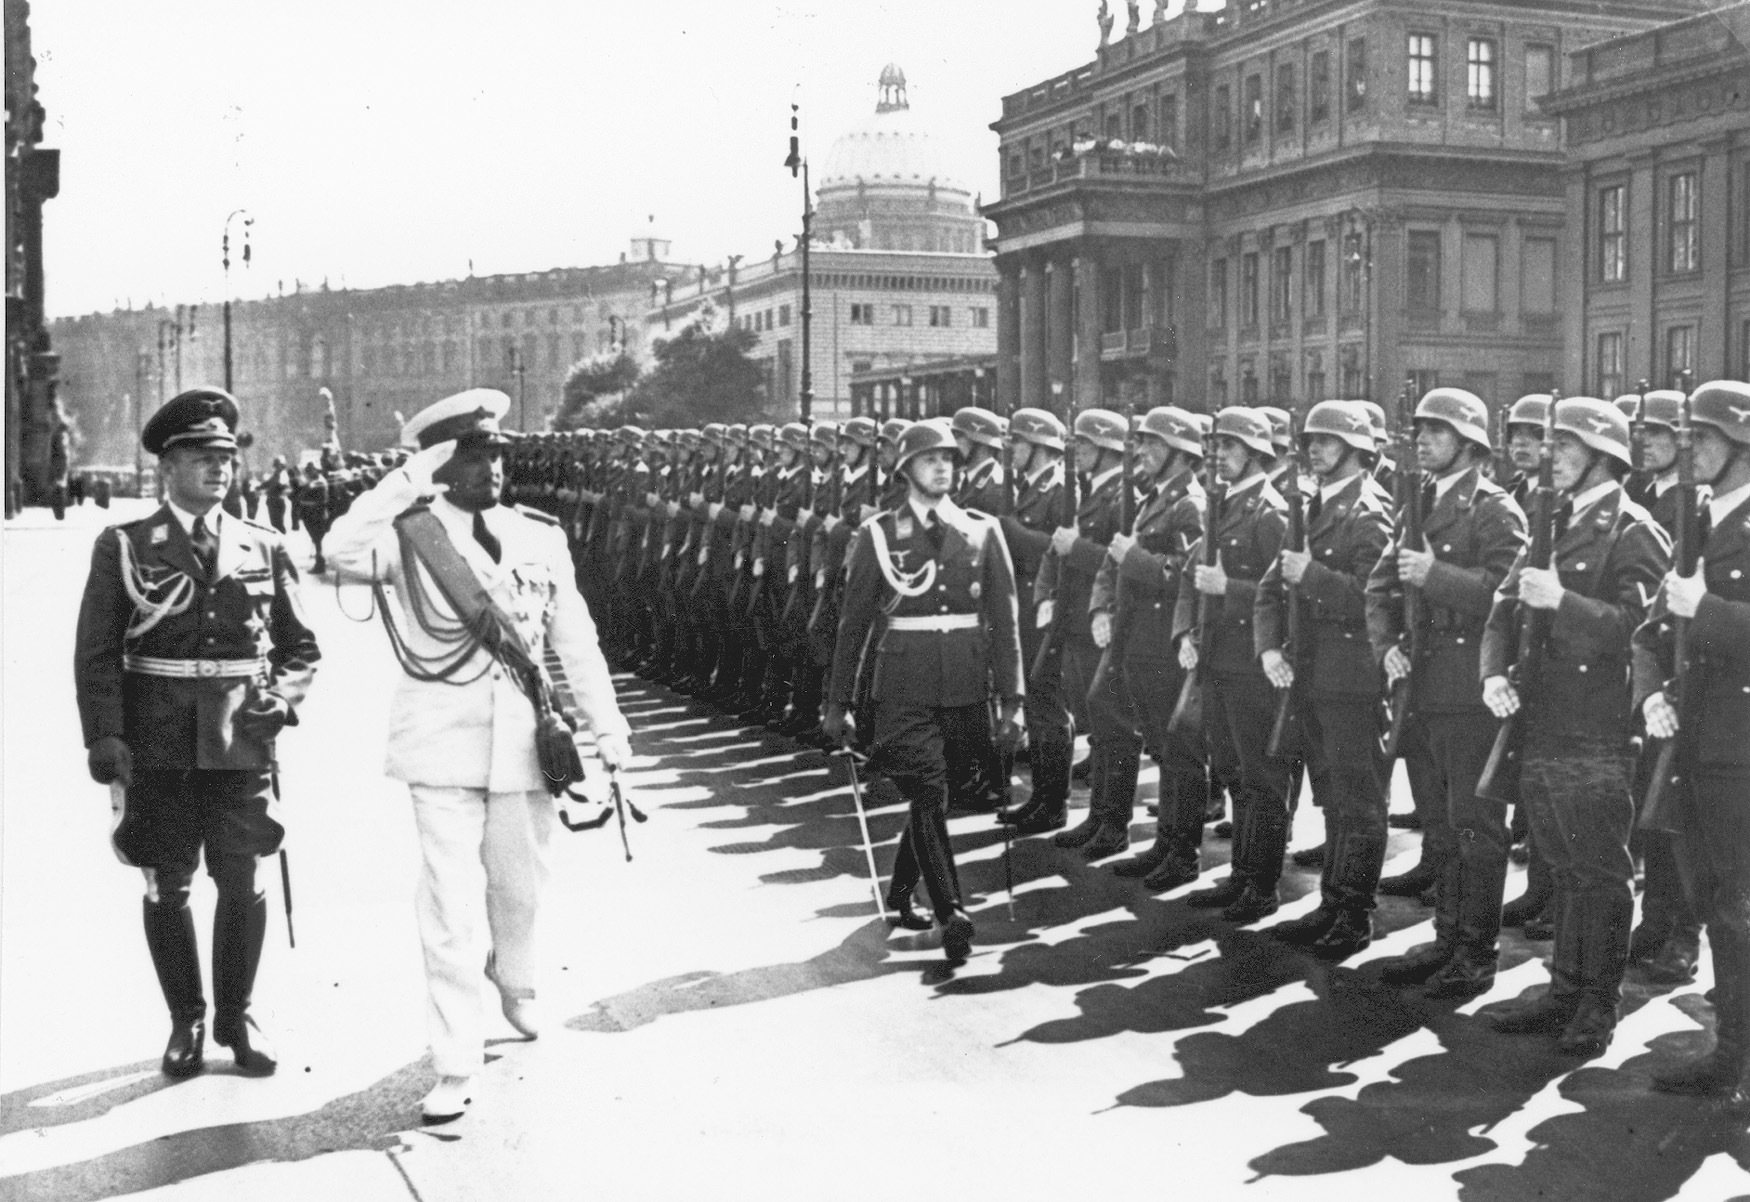 In August 1938, Balbo salutes as he reviews a Luftwaffe honor guard with General Erhard Milch in Berlin.